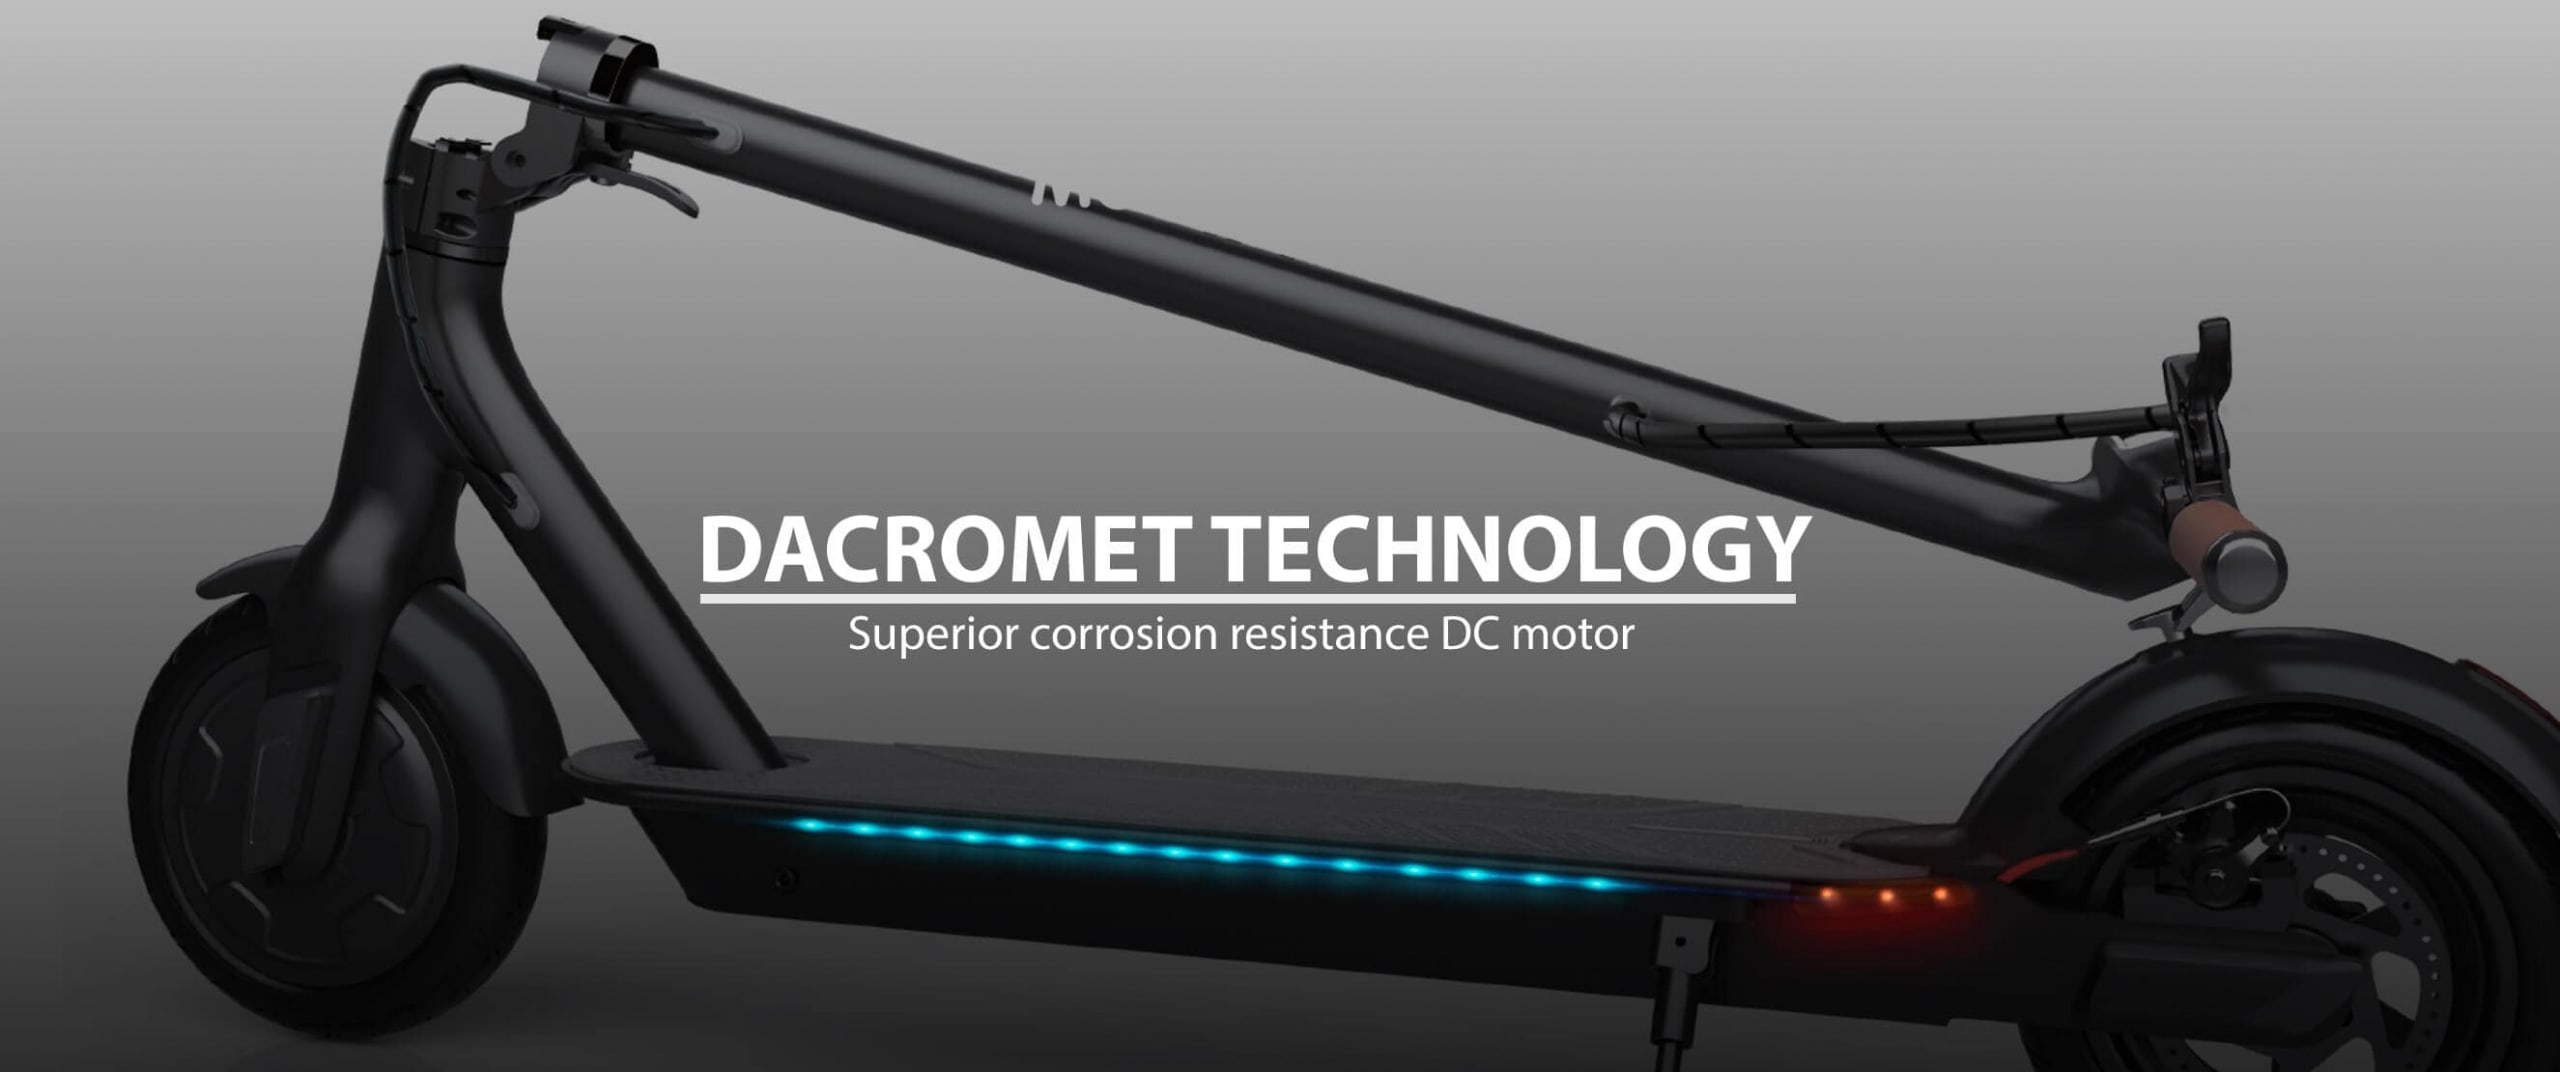 MOBOT L1-1 UL2272 certified e-scooter dacromet technology